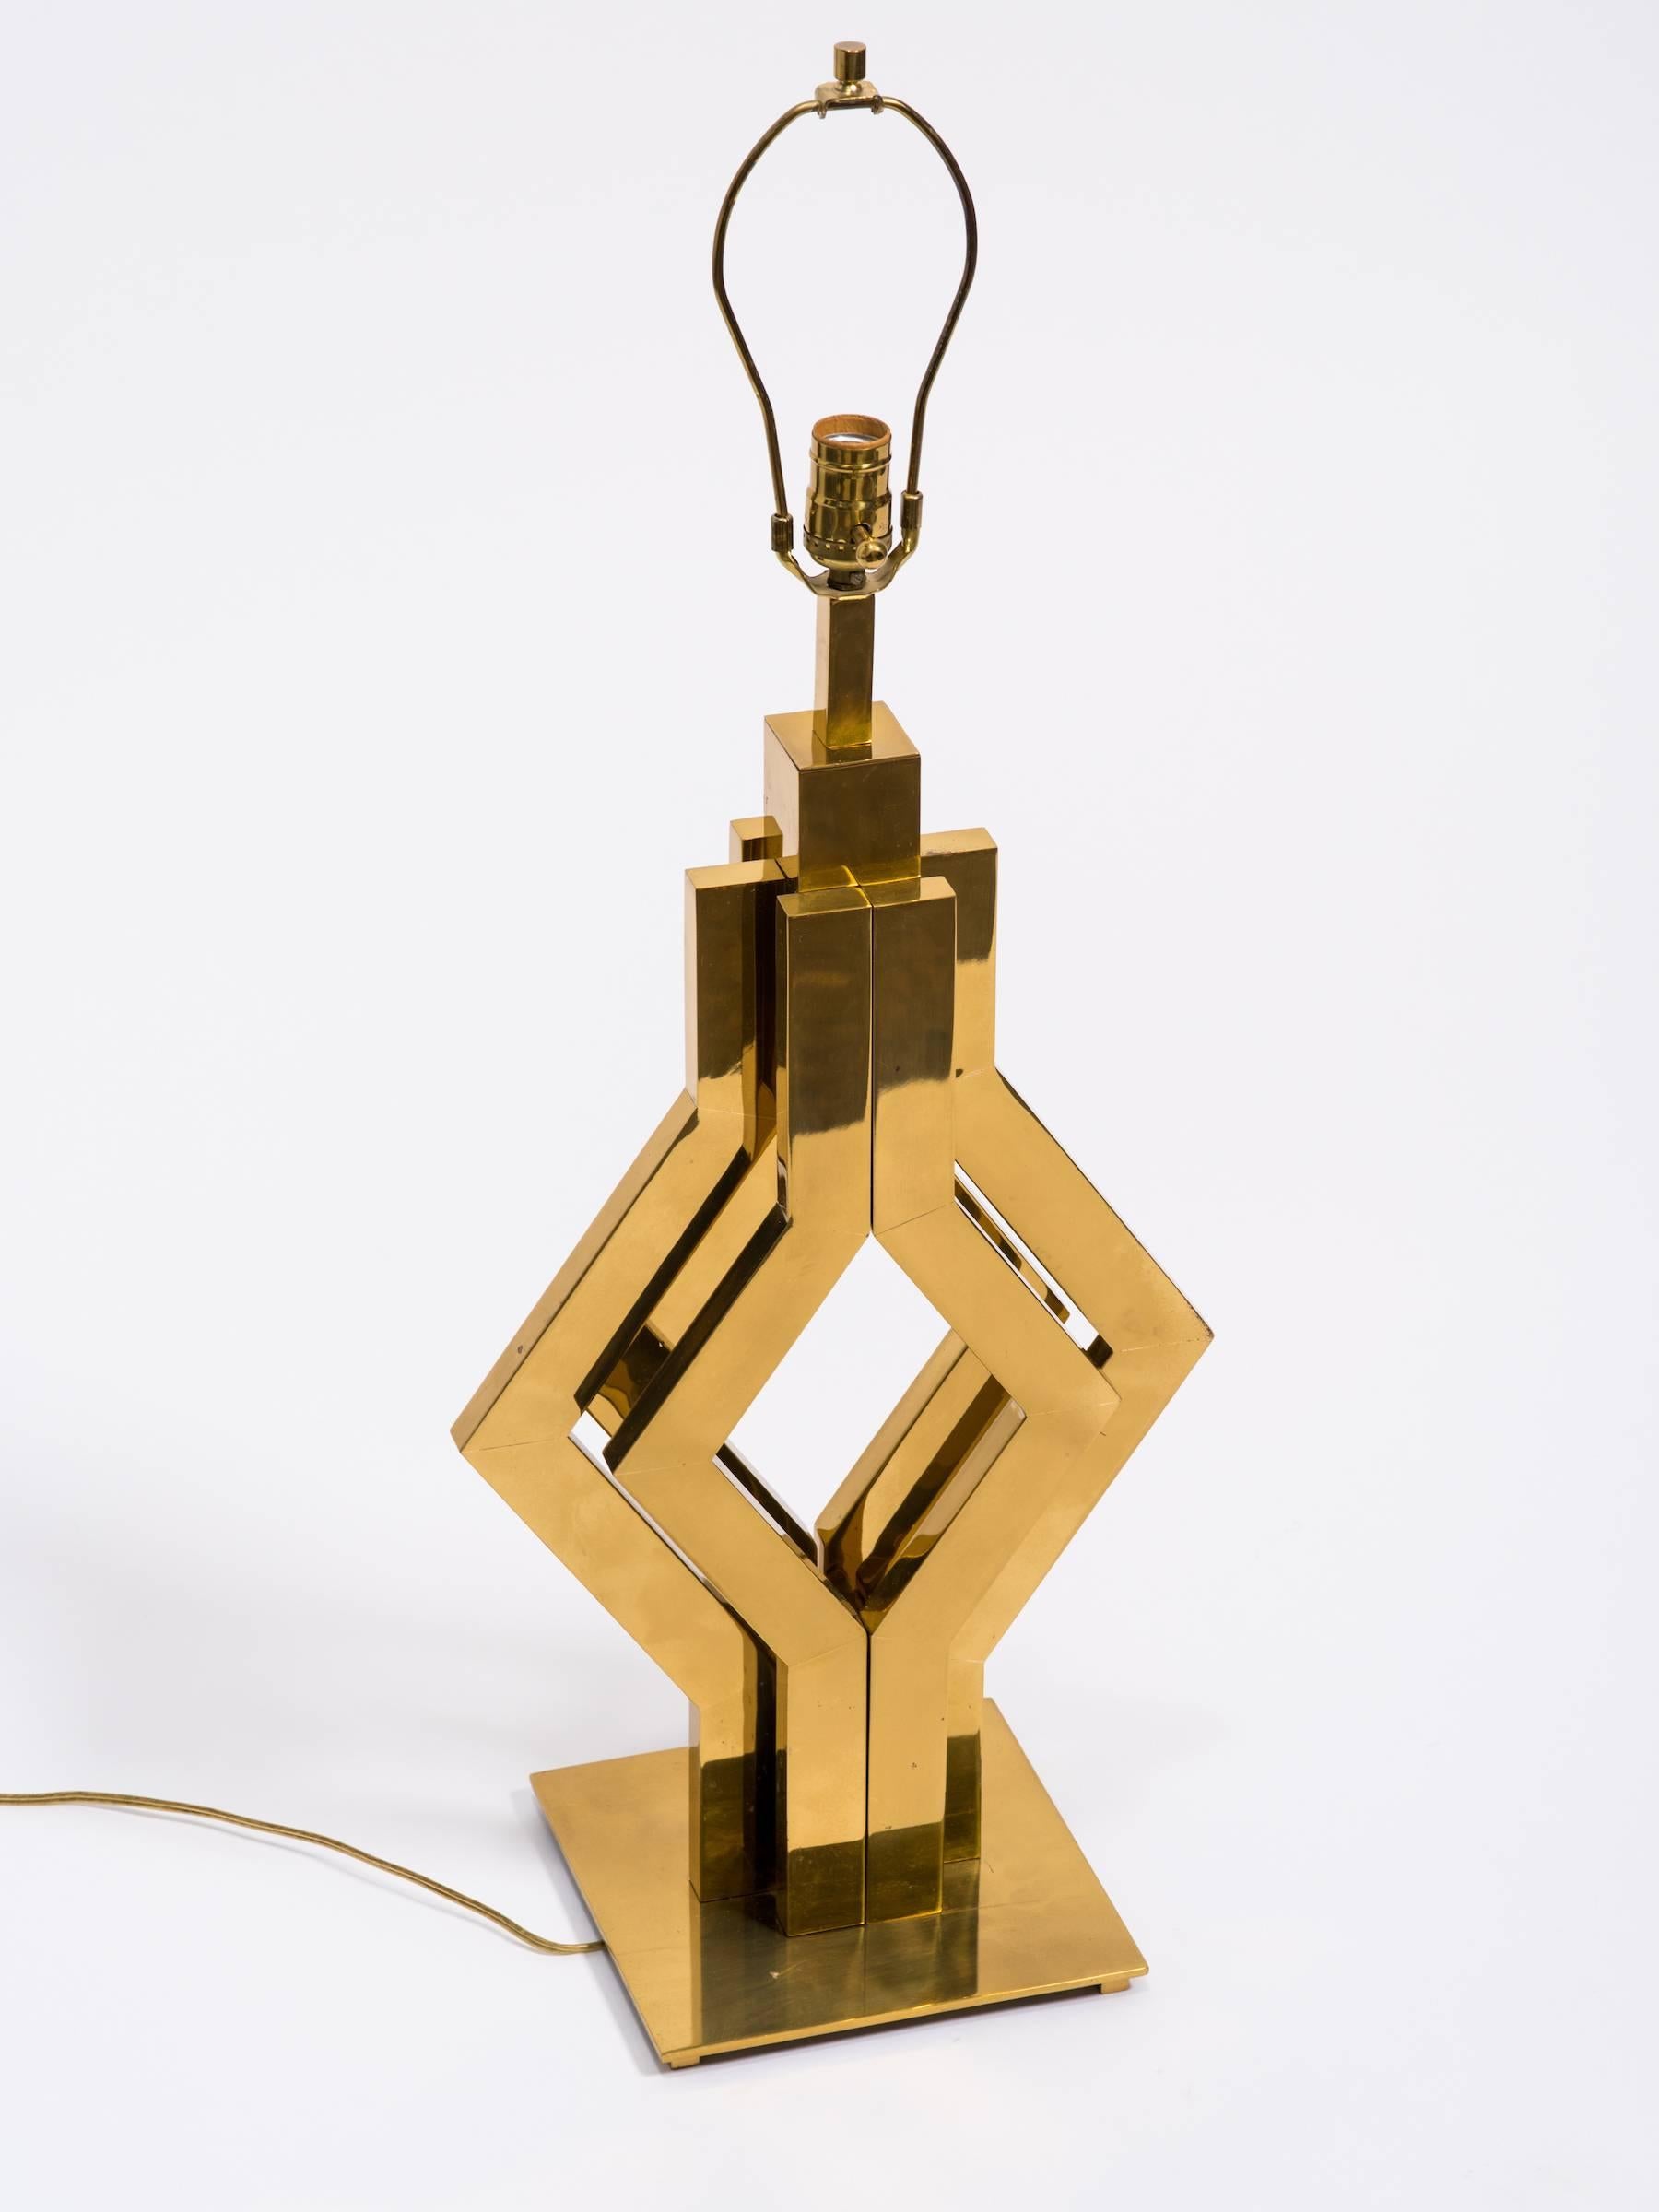 1970s geometric brass table lamp, spots on finish.

Height is to top of socket.